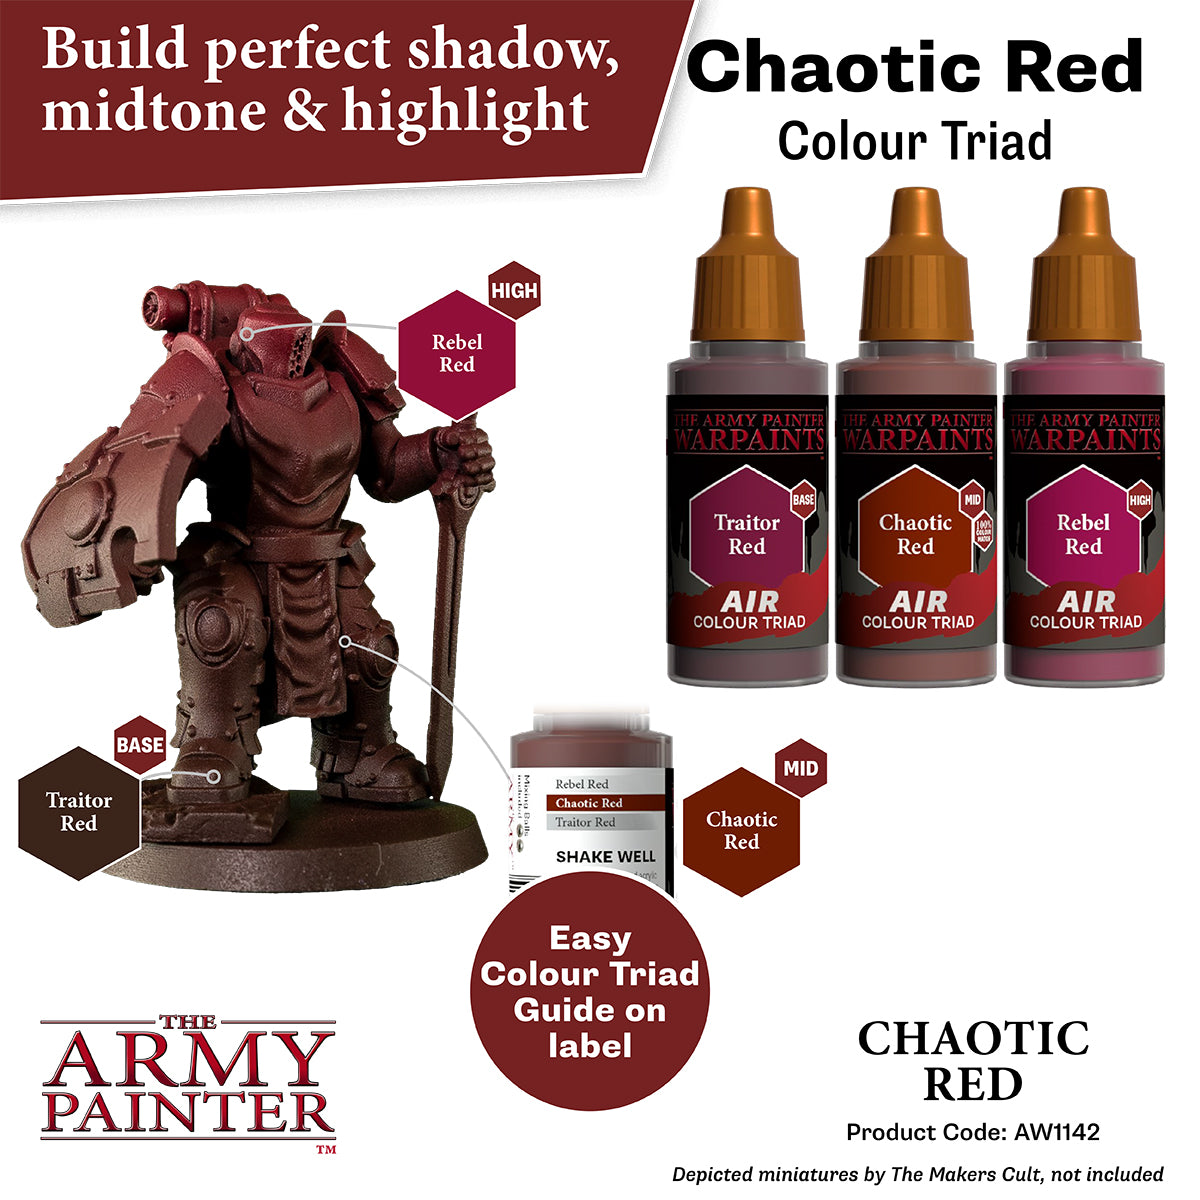 Warpaints Air: Chaotic Red